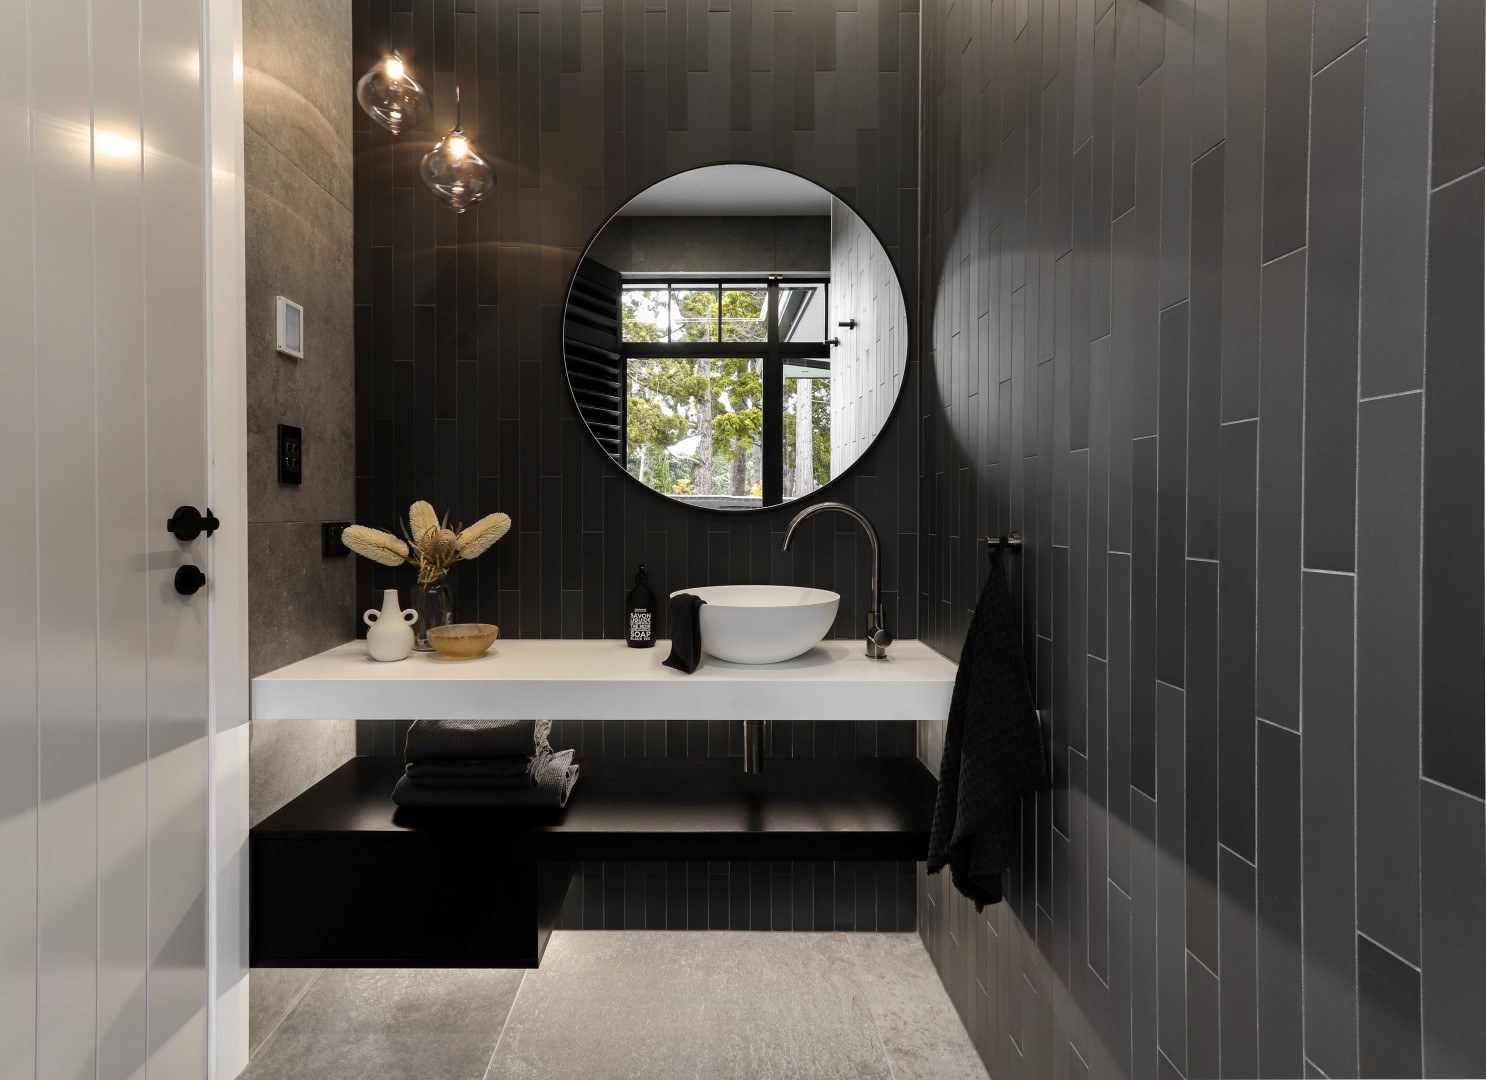 floating-bench-white-bathroom-fixtures-contrasting-taps-light-mirror-arcline-architecture